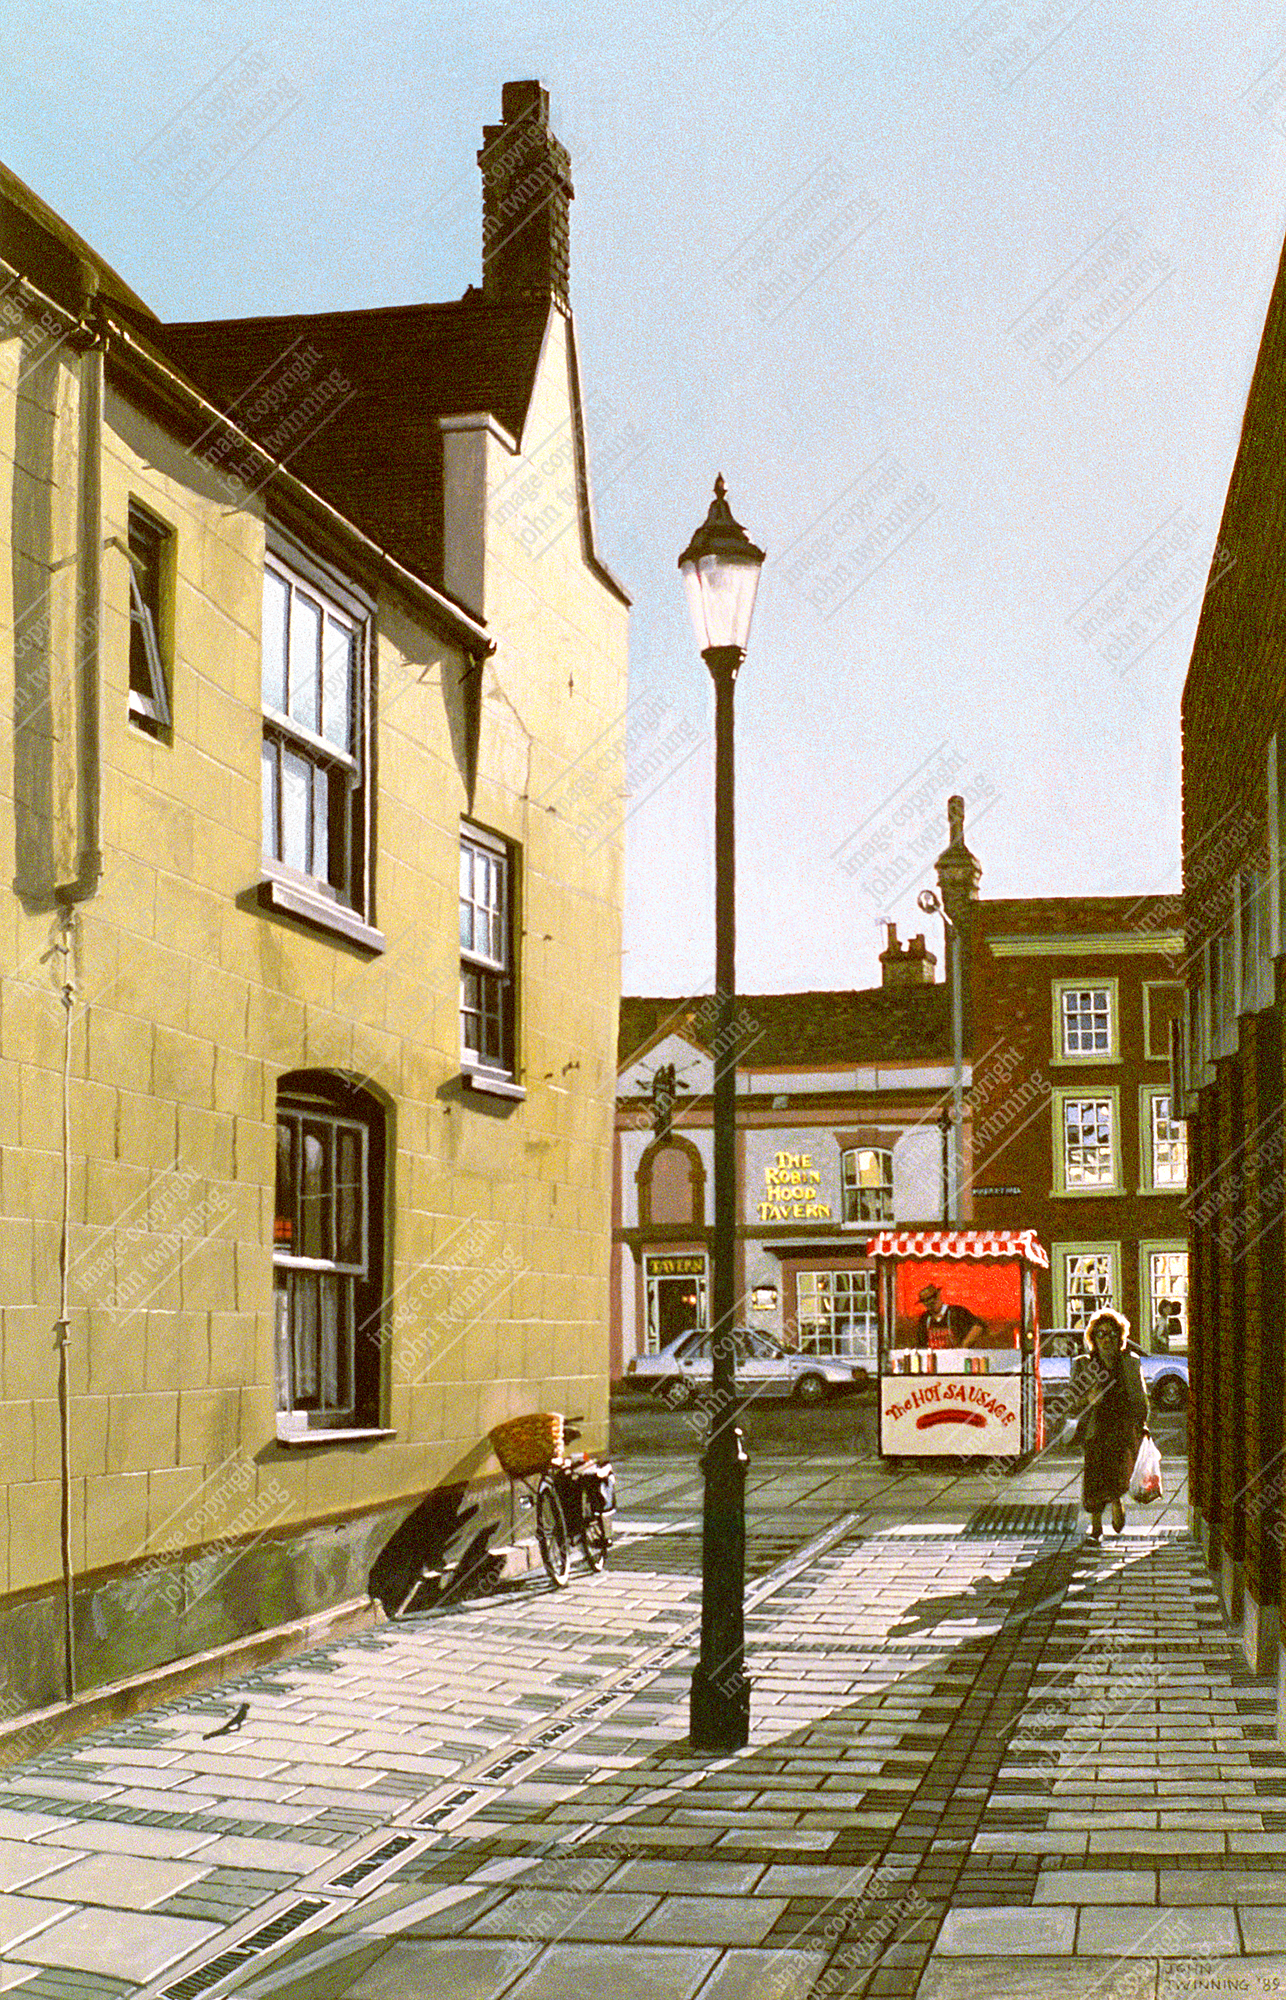 ‘Towards The Robin Hood Tavern, St. Ives’ – art print from a townscape watercolour painting of this town’s market area.